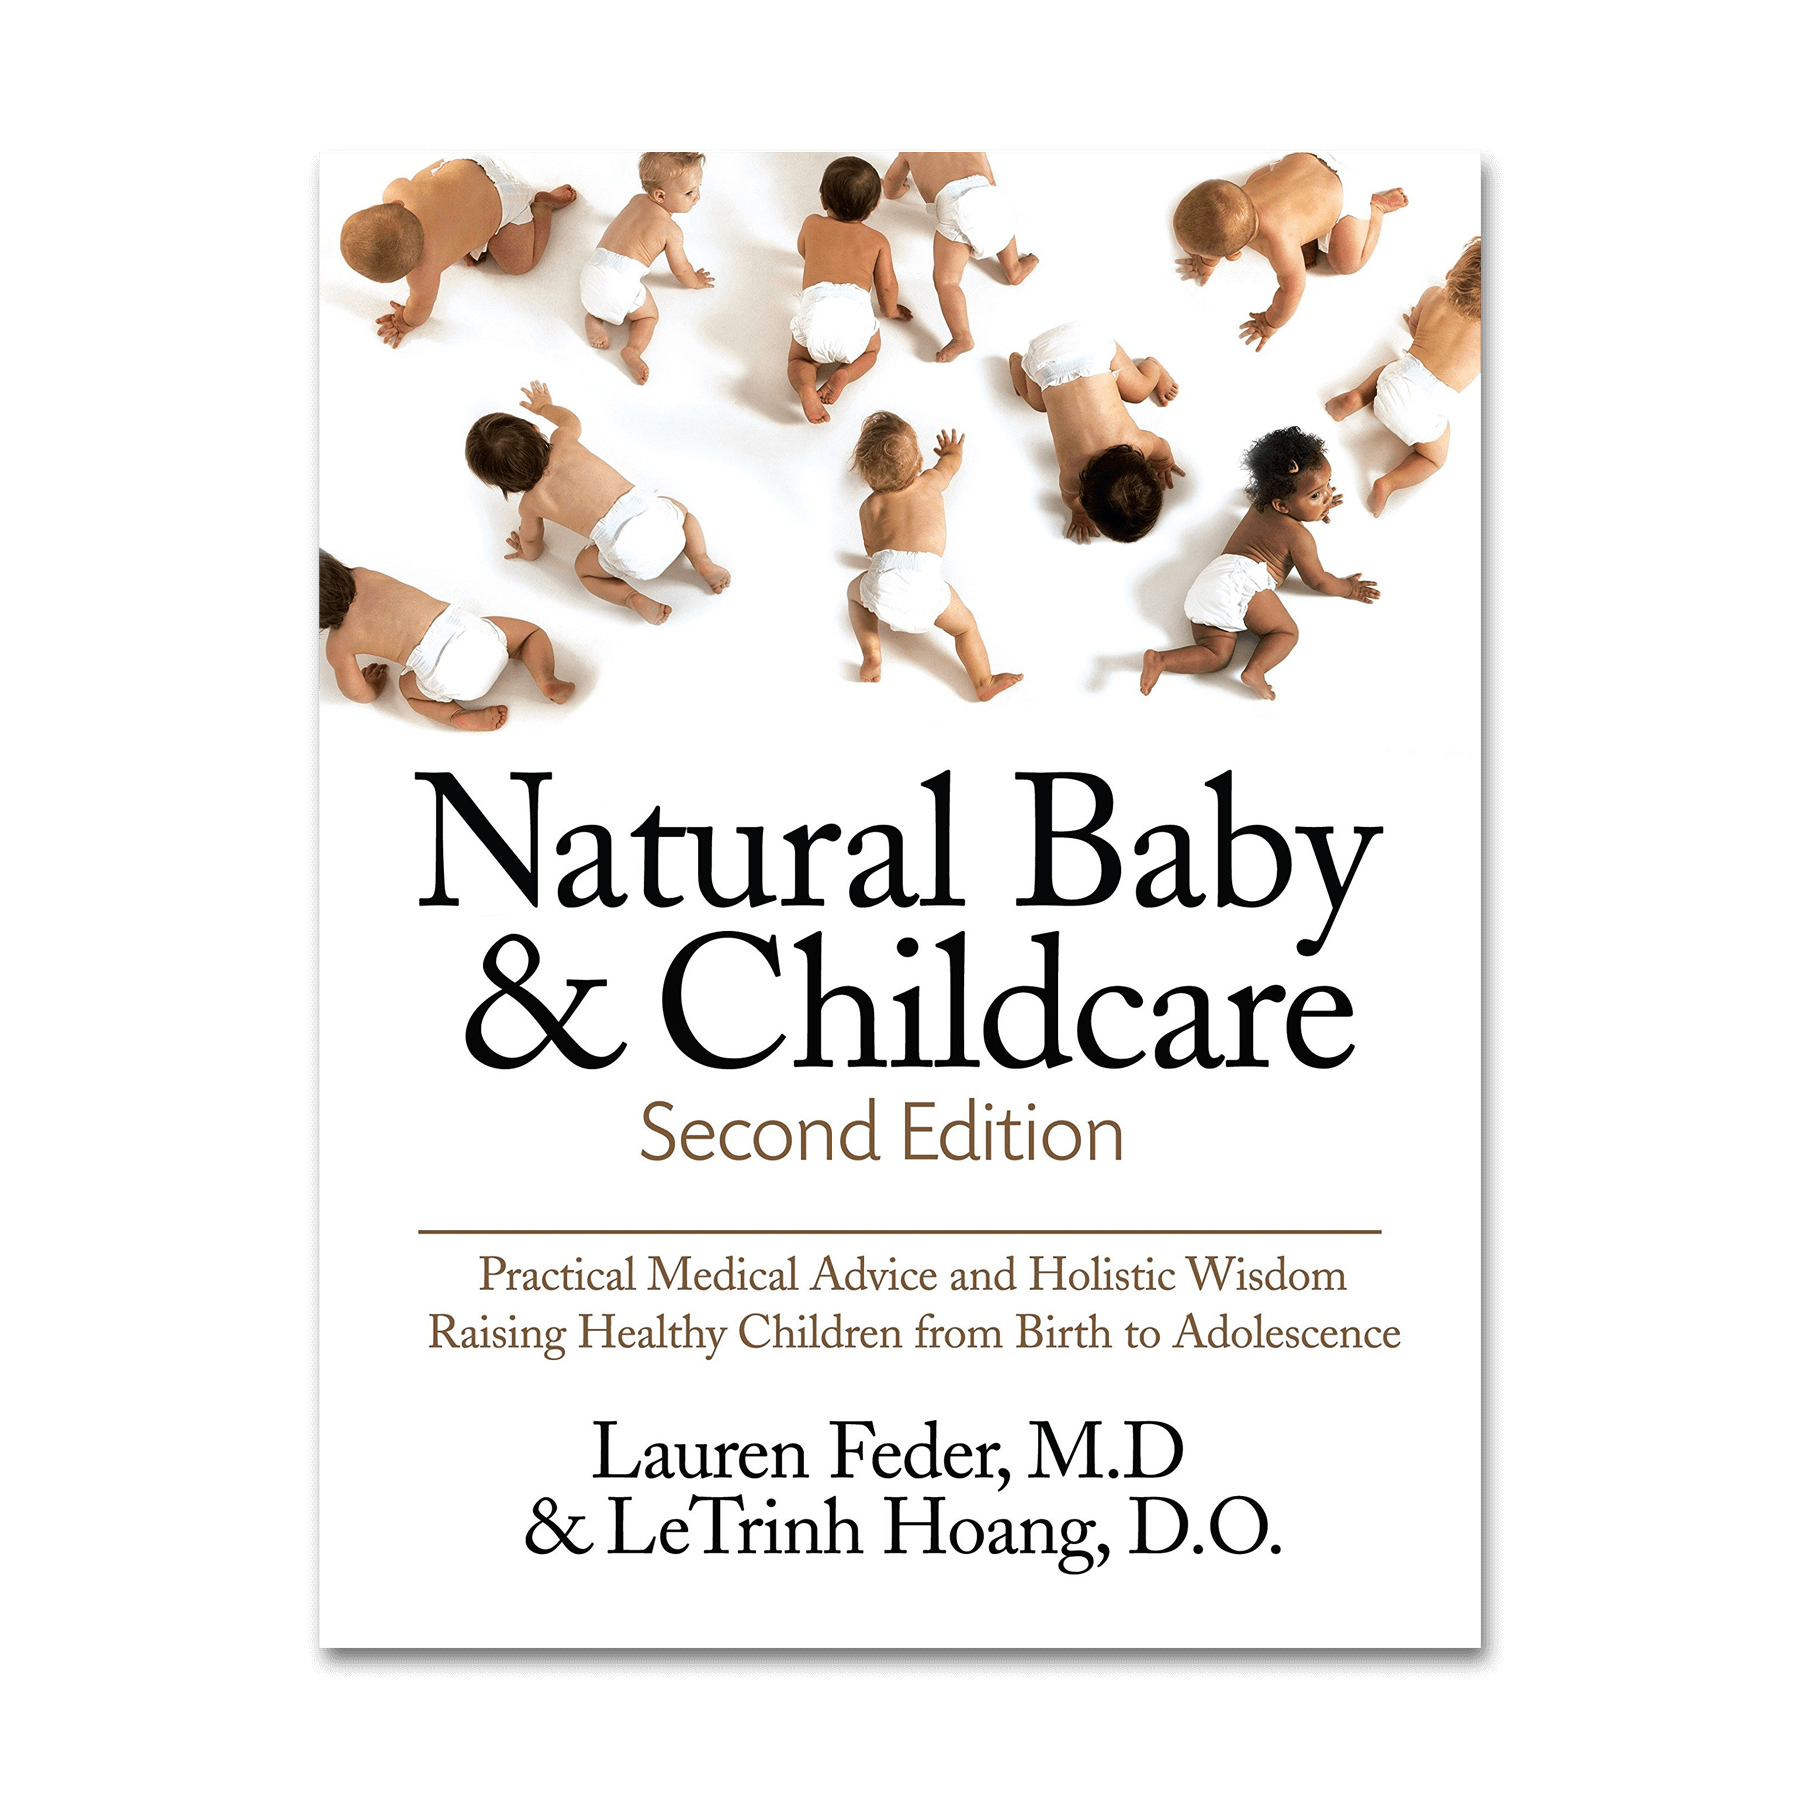 Natural Baby and Childcare, Second Edition